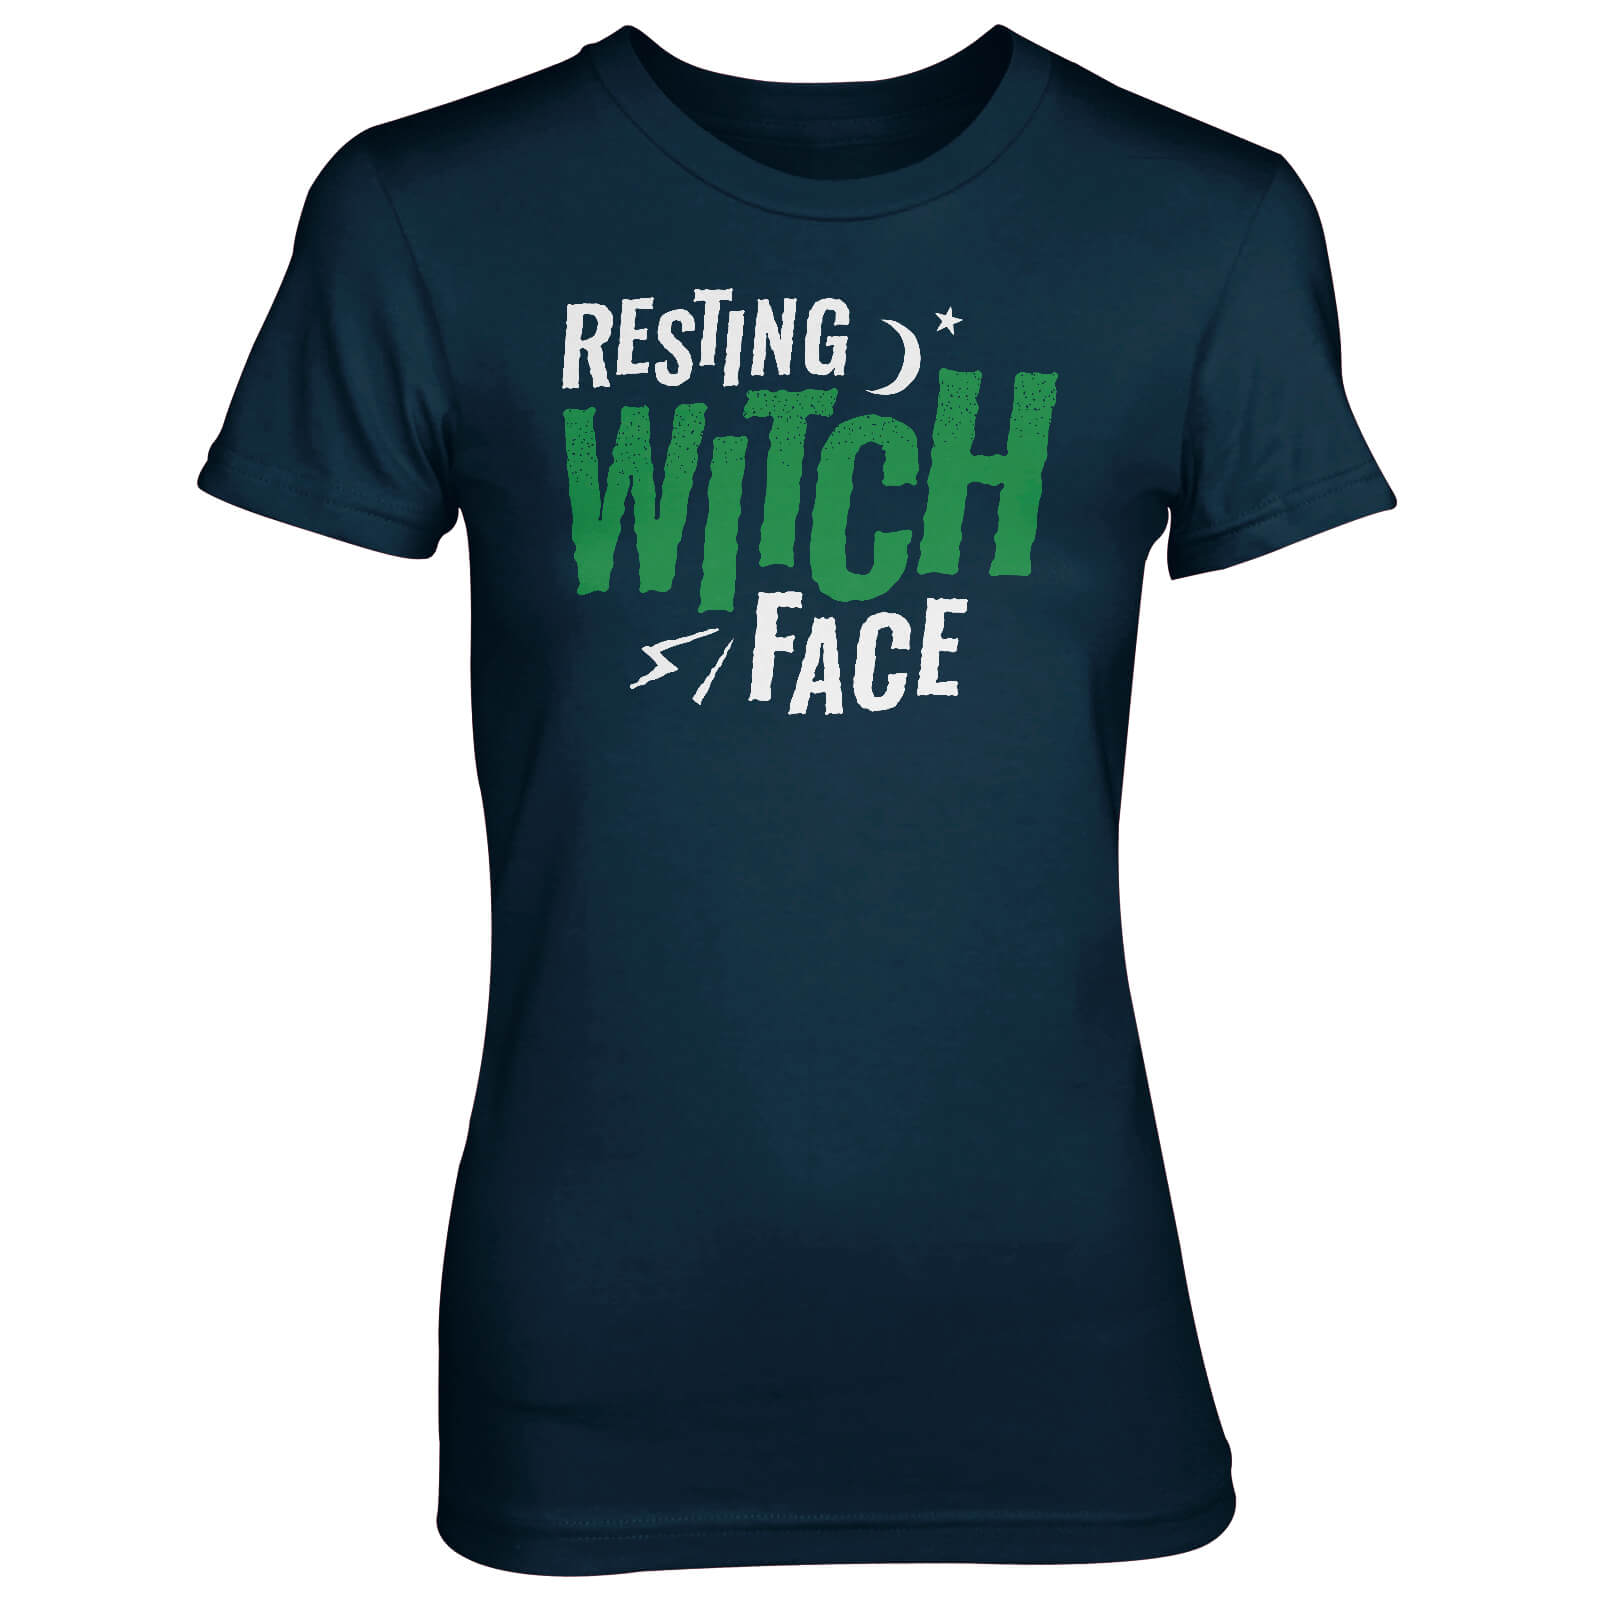 Resting Witch Face Women's Navy T-Shirt - S - Navy